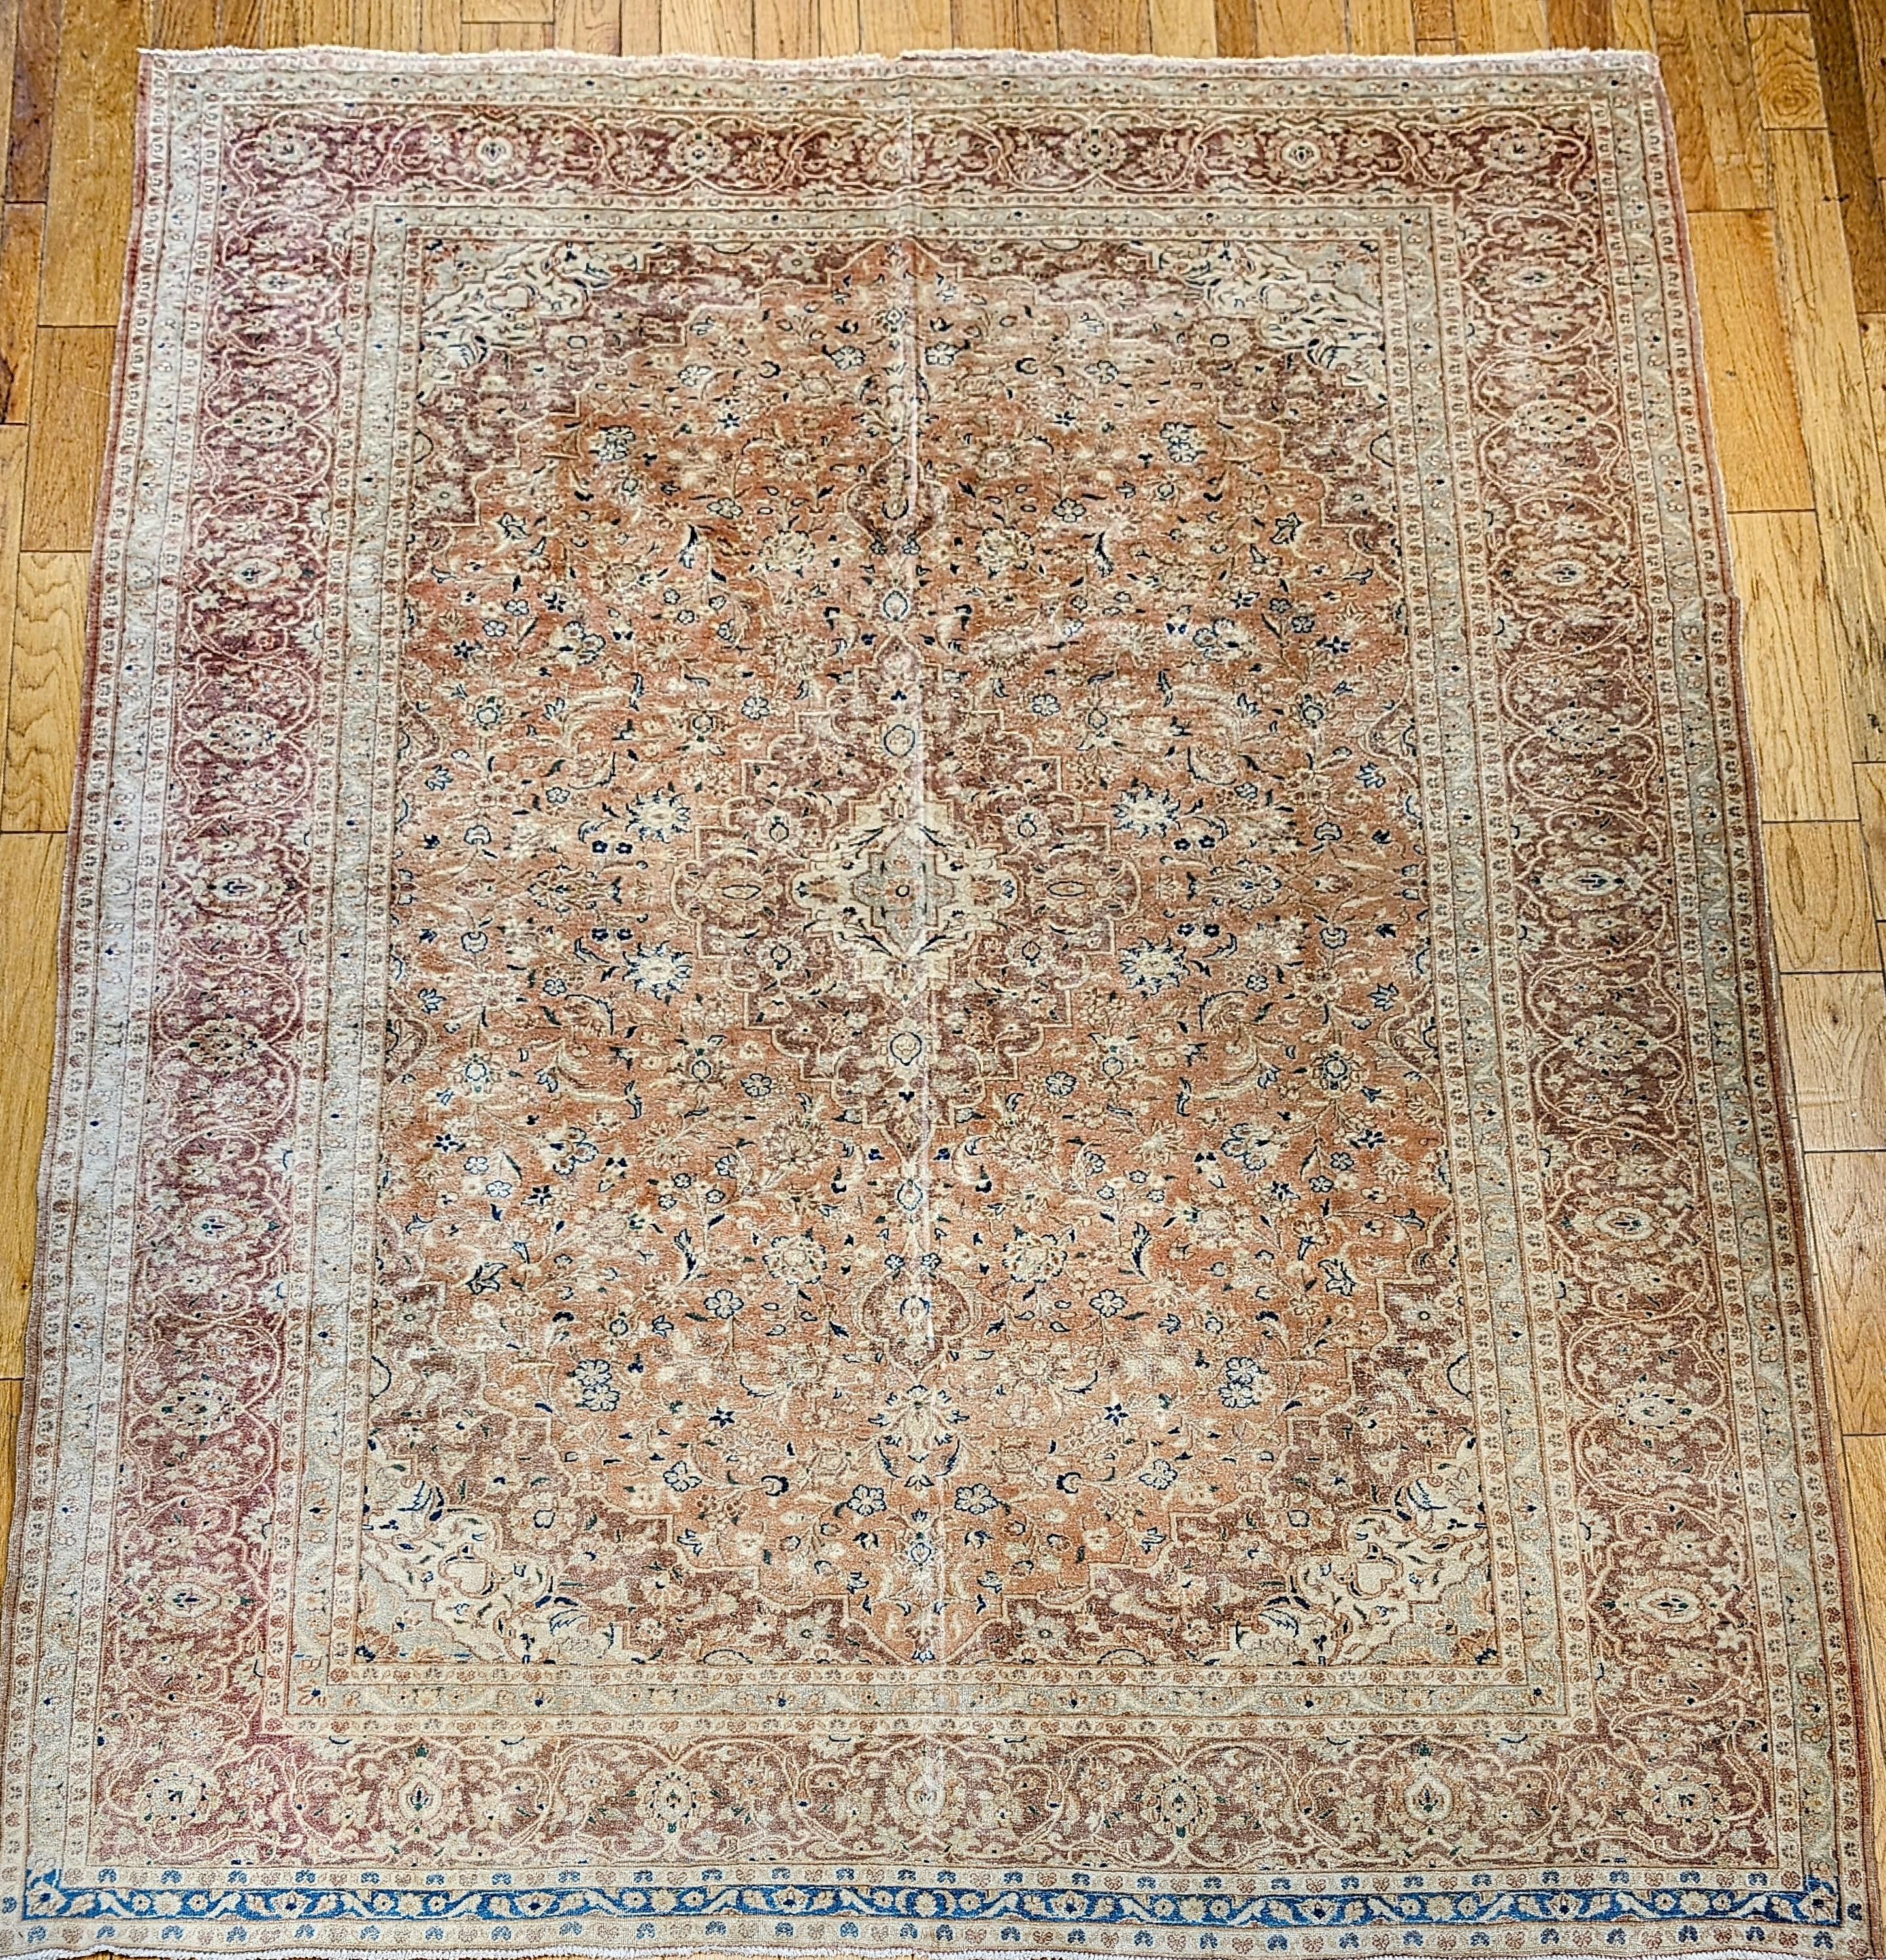 Wonderful example of a vintage Persian Tabriz room size rug in pale apricot color background with accent colors in green and blue from the early 1900s.  The rug is in an allover pattern with a small central medallion and the corner spandrels in